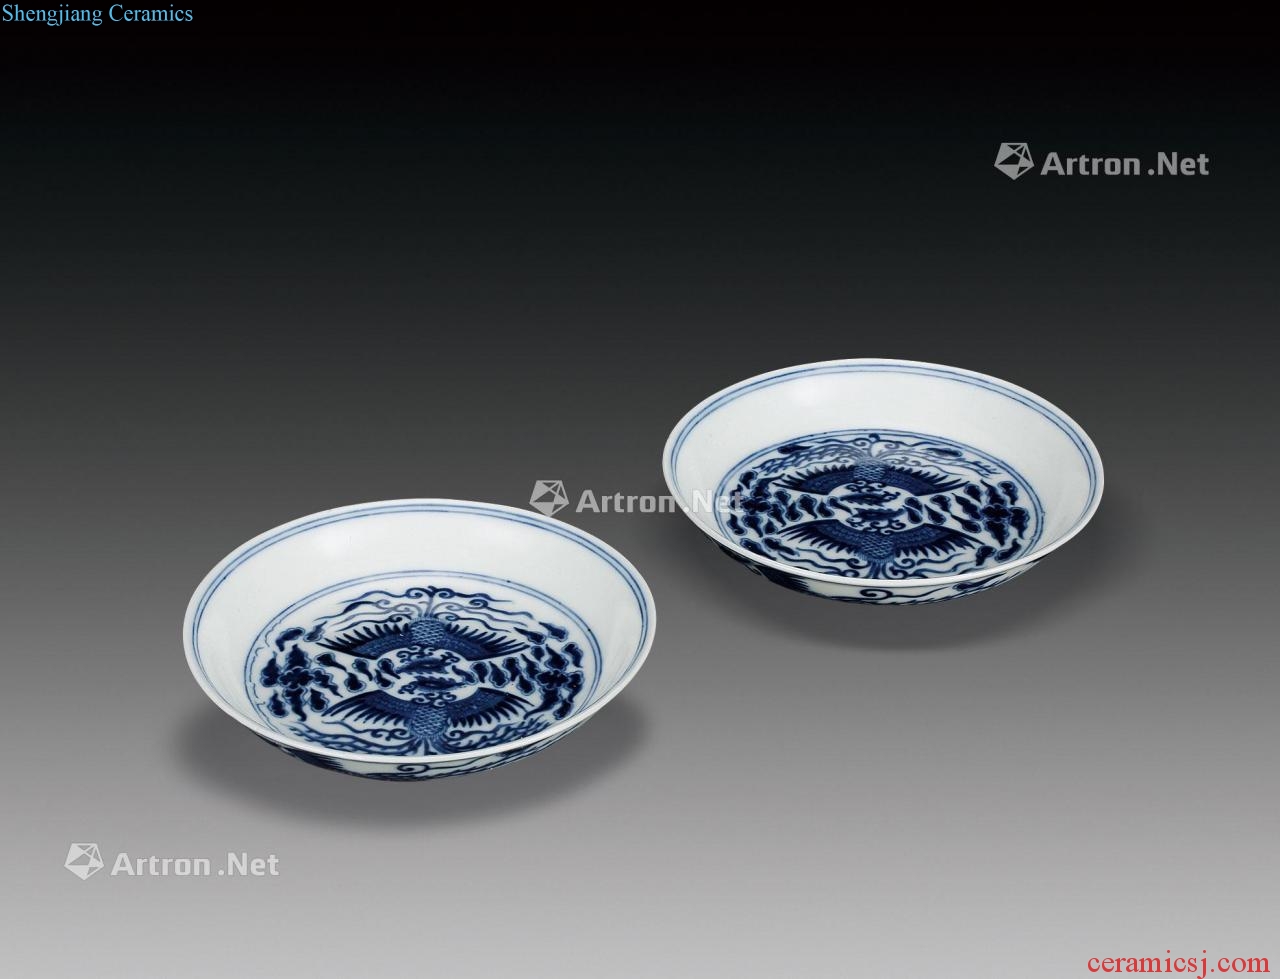 Xuantong Period A PAIR OF BLUE AND WHITE PHOENIX PATTERNED PLATES